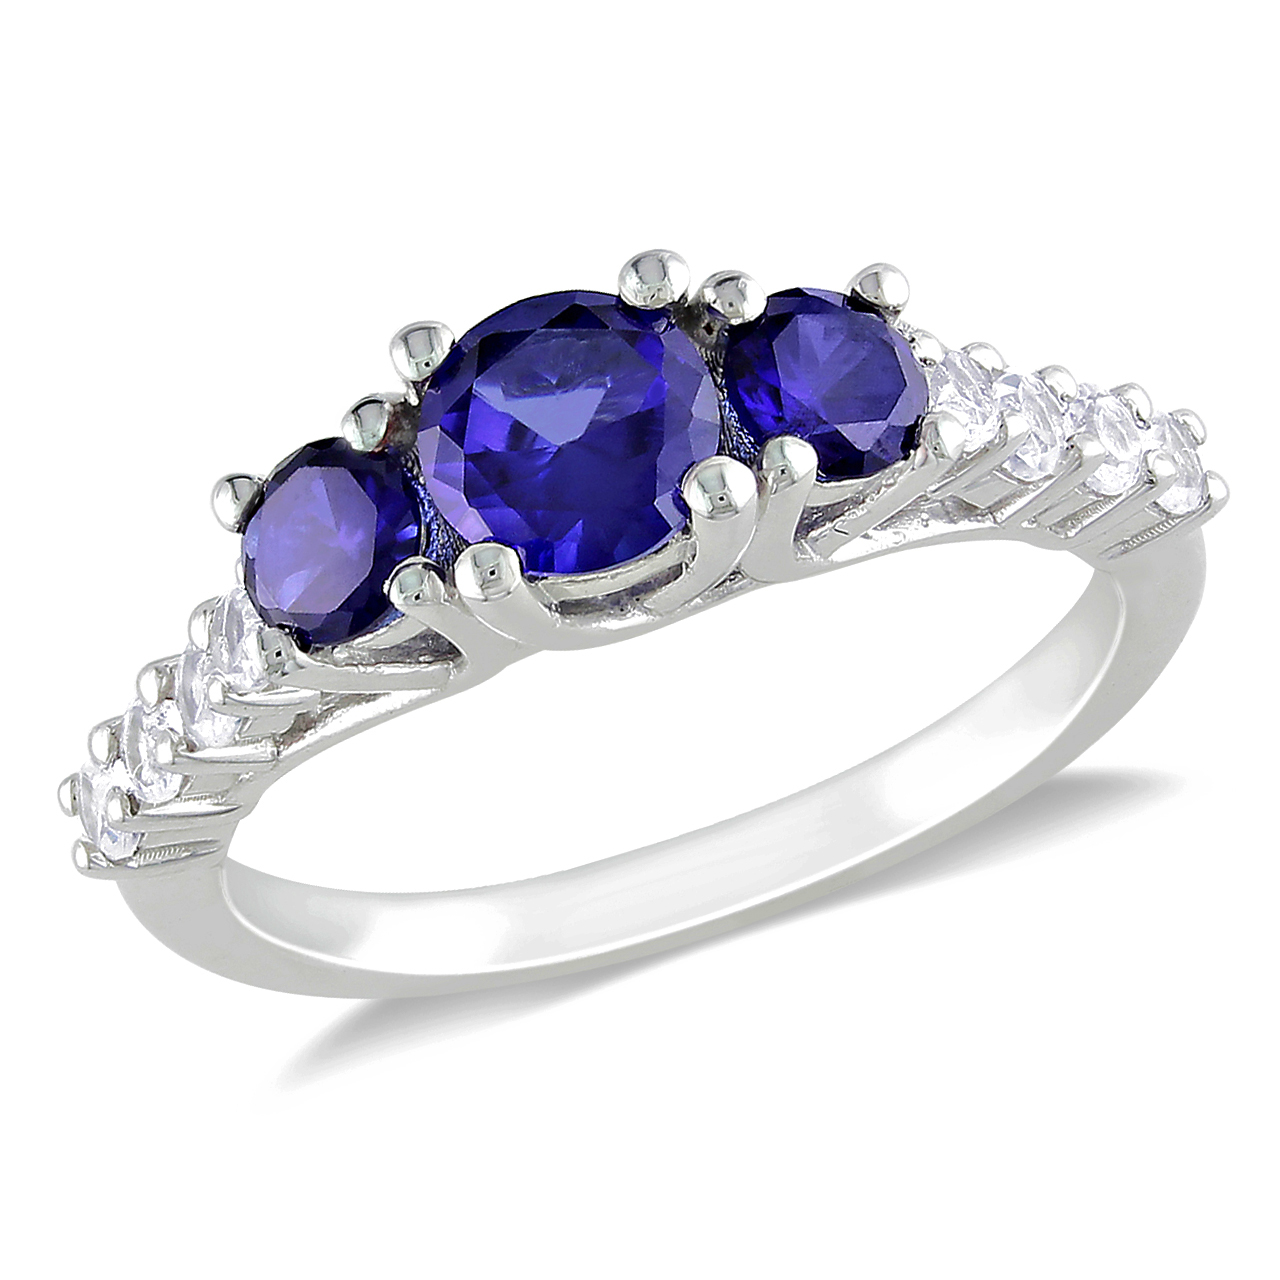 Amour 1 1/3 Carat T.G.W. Multi-Sapphire Fashion Ring in Sterling Silver